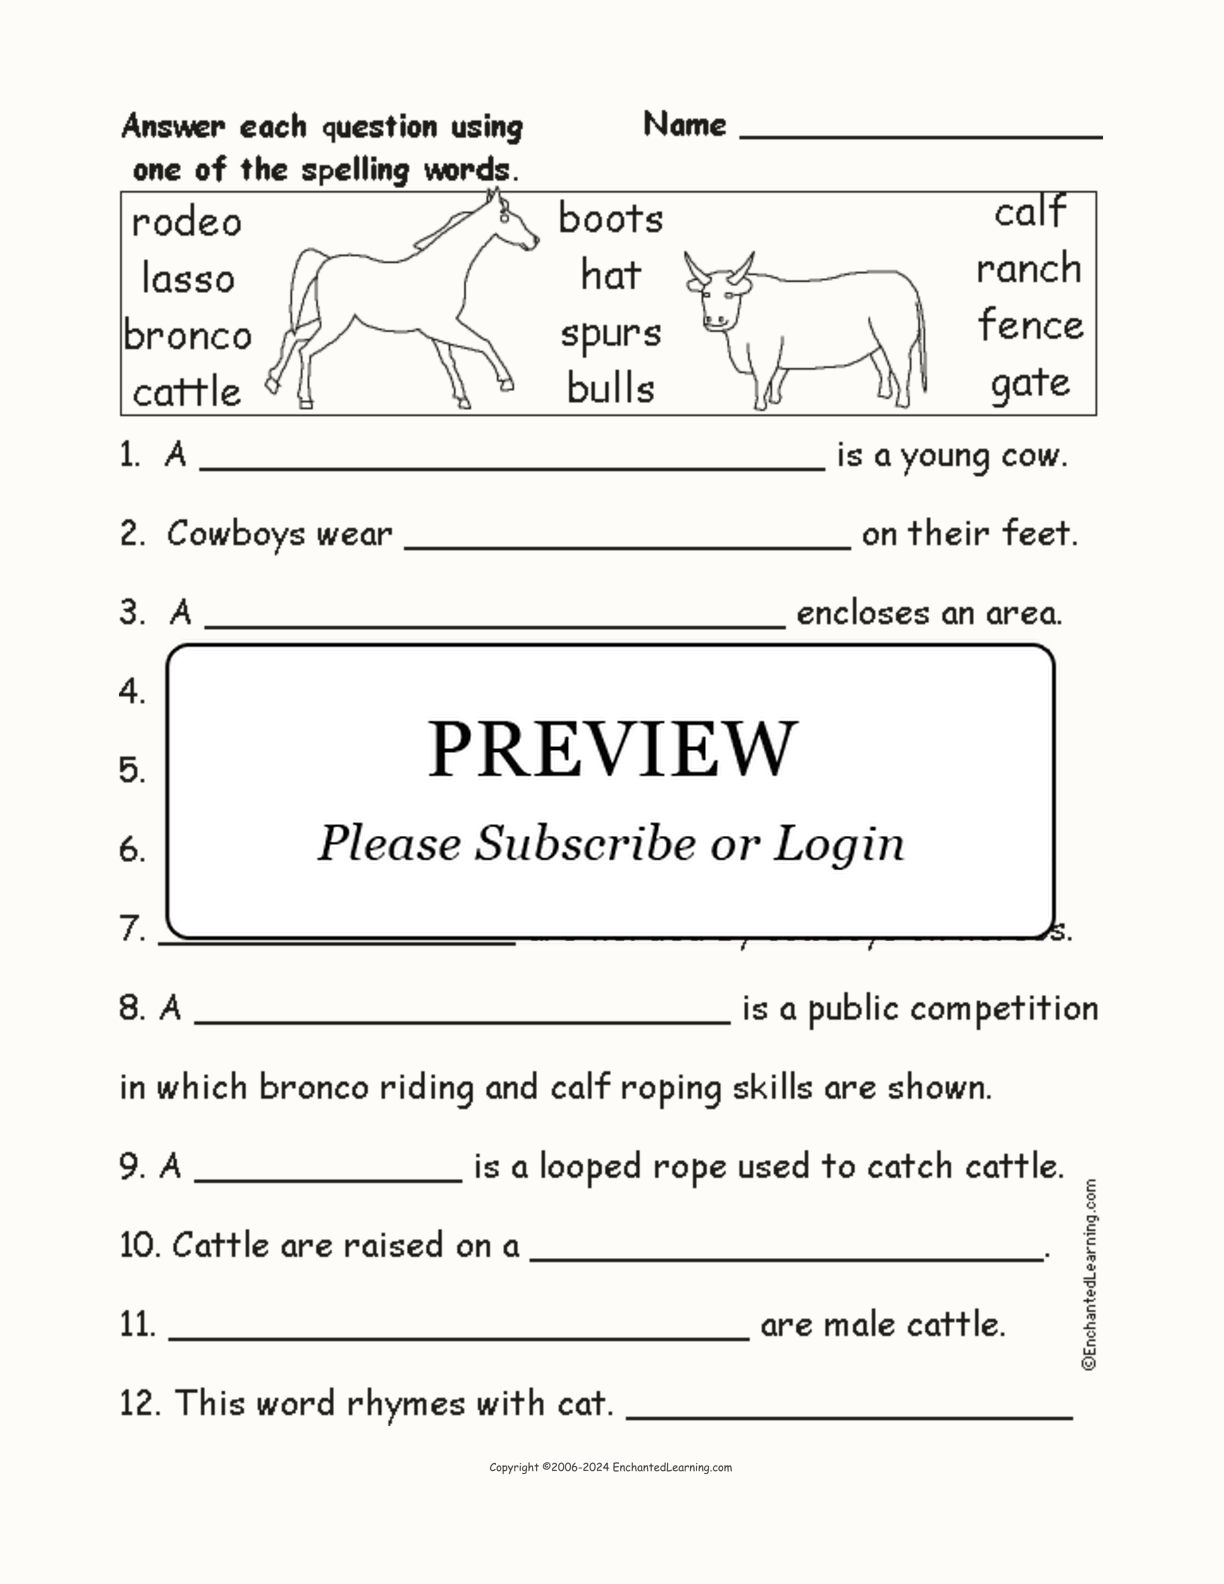 Rodeo Spelling Word Questions interactive worksheet page 1